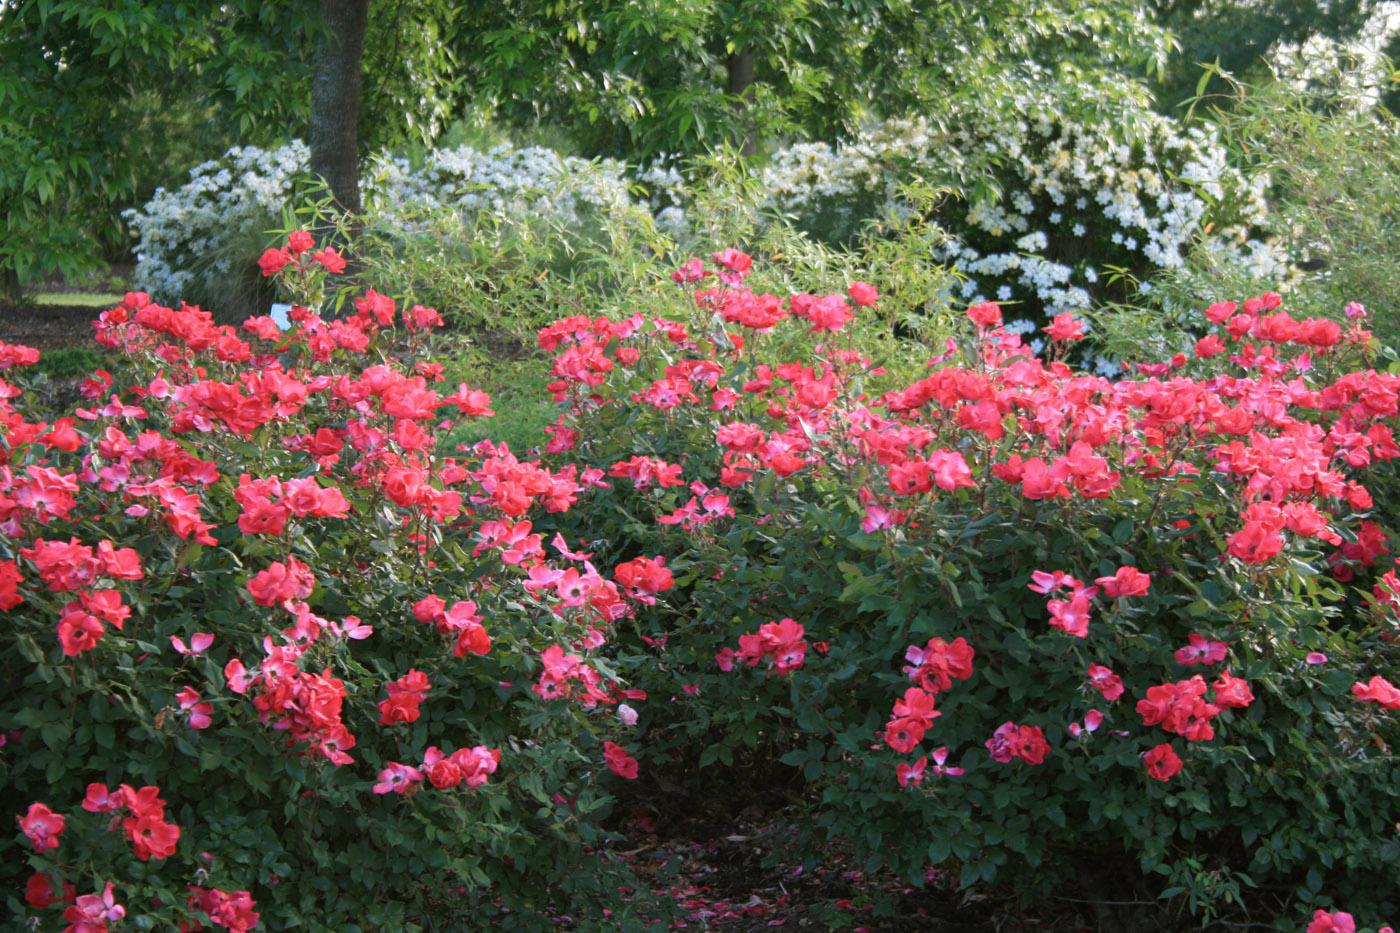 How to Grow and Care for Knock Out Roses